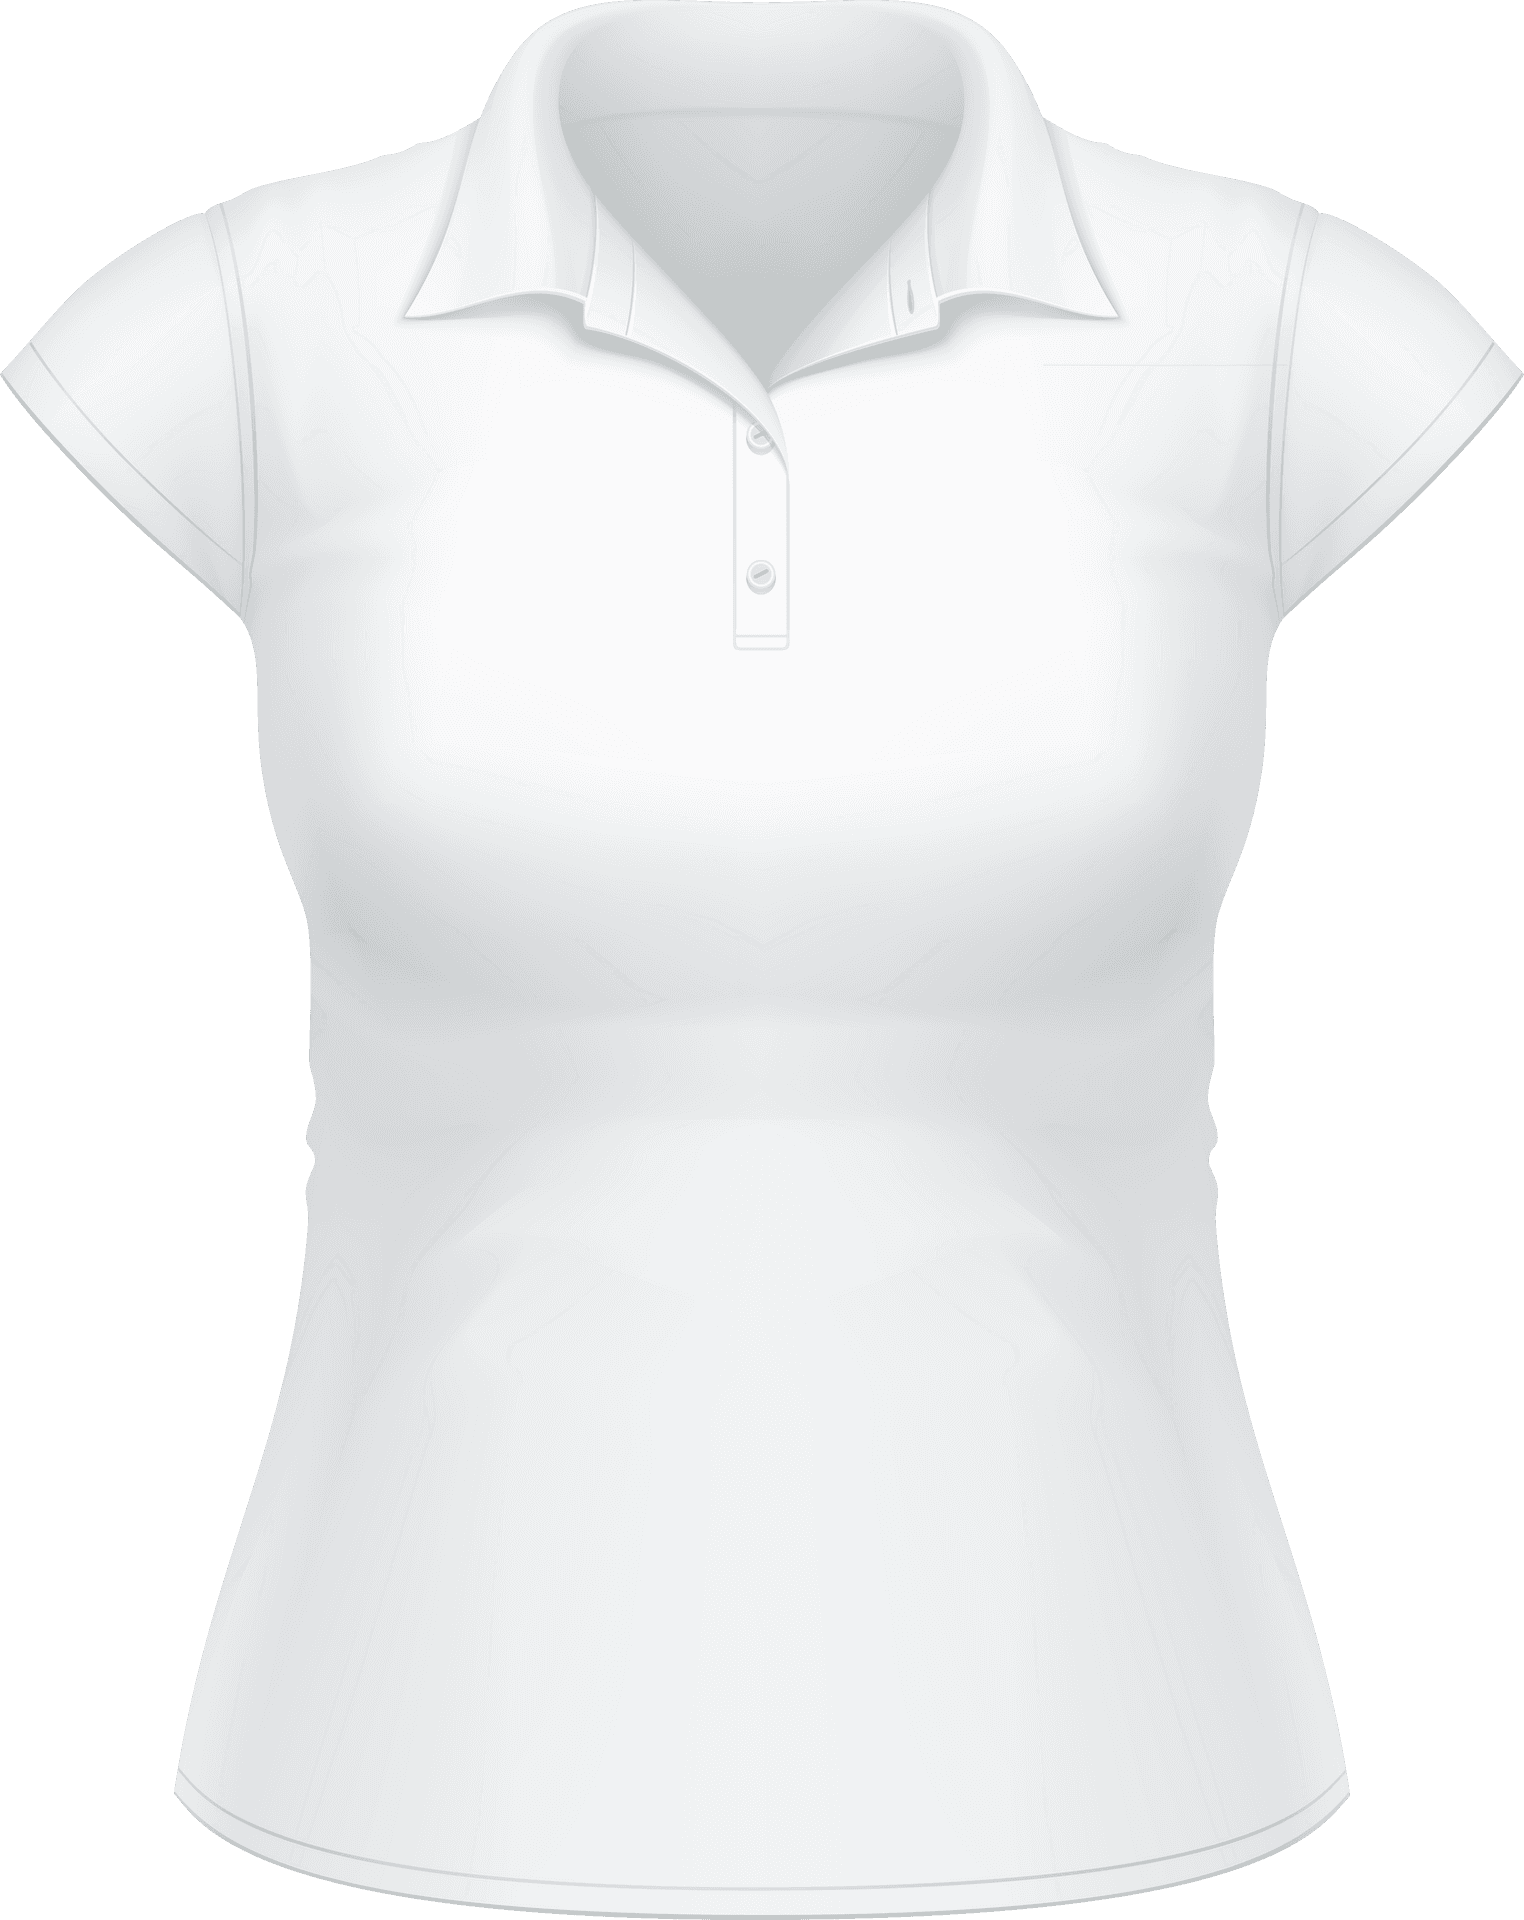 White Polo Shirt Template PNG image